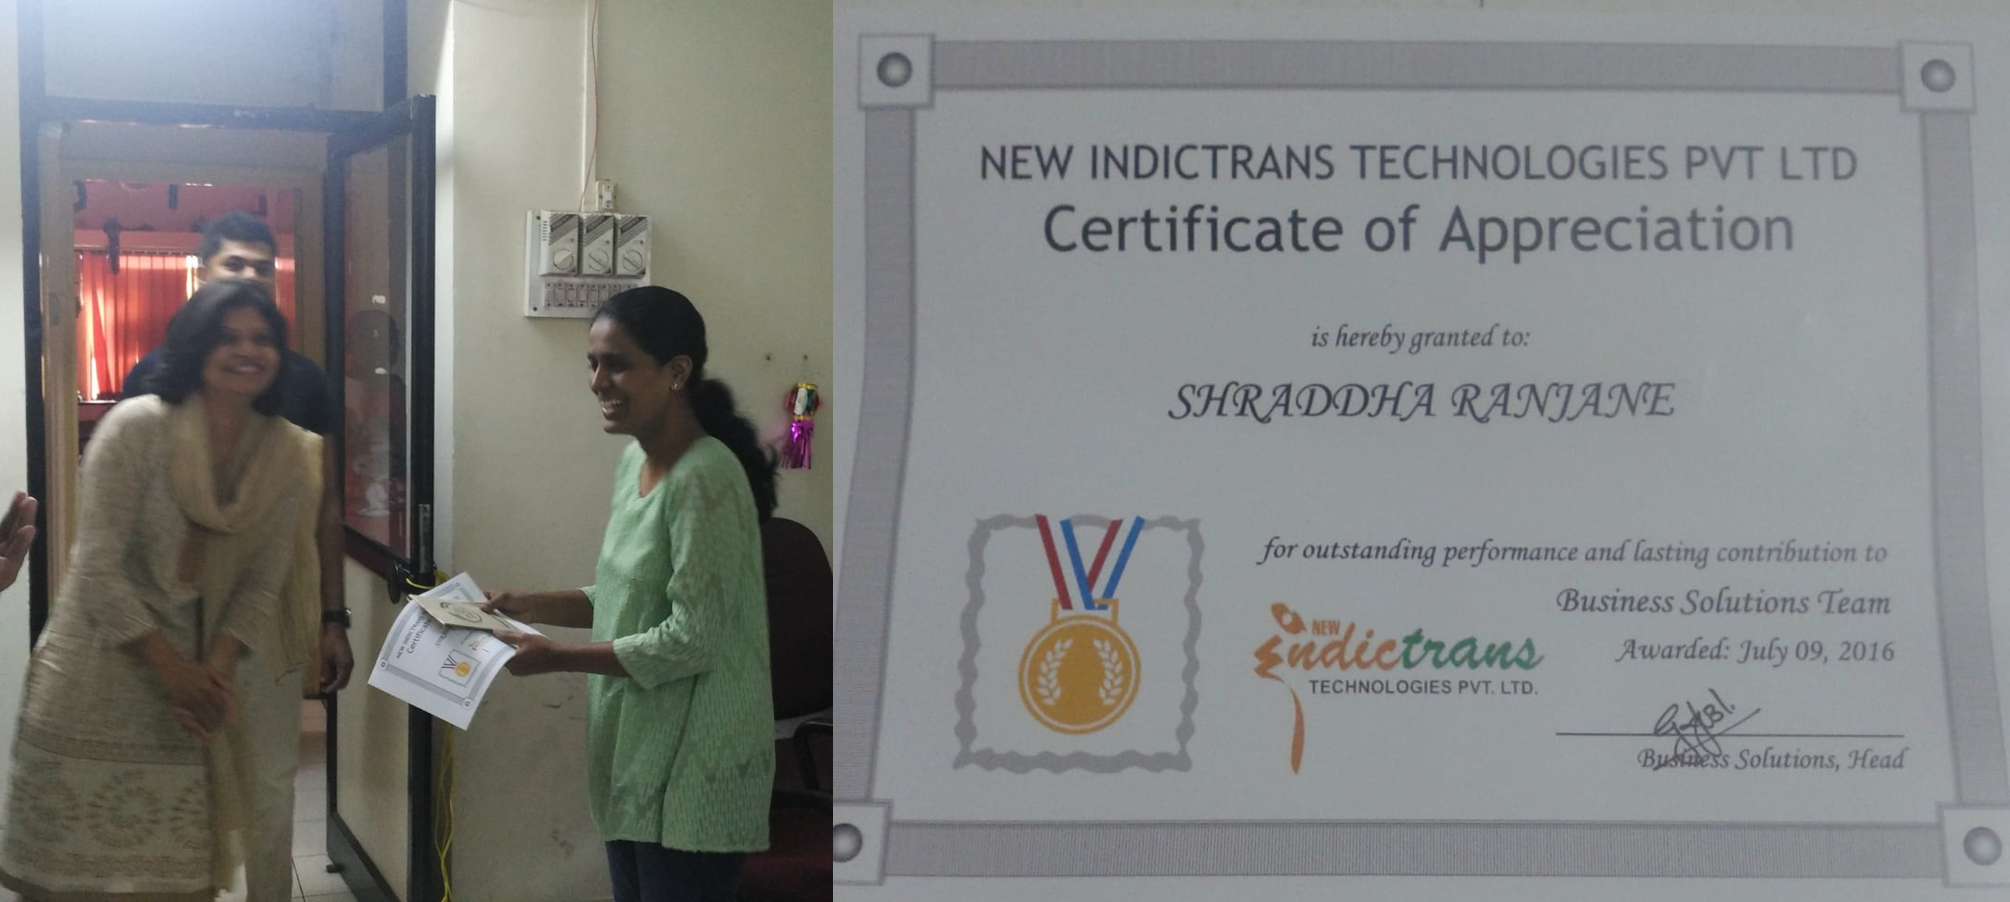 1st Award in Indictrans